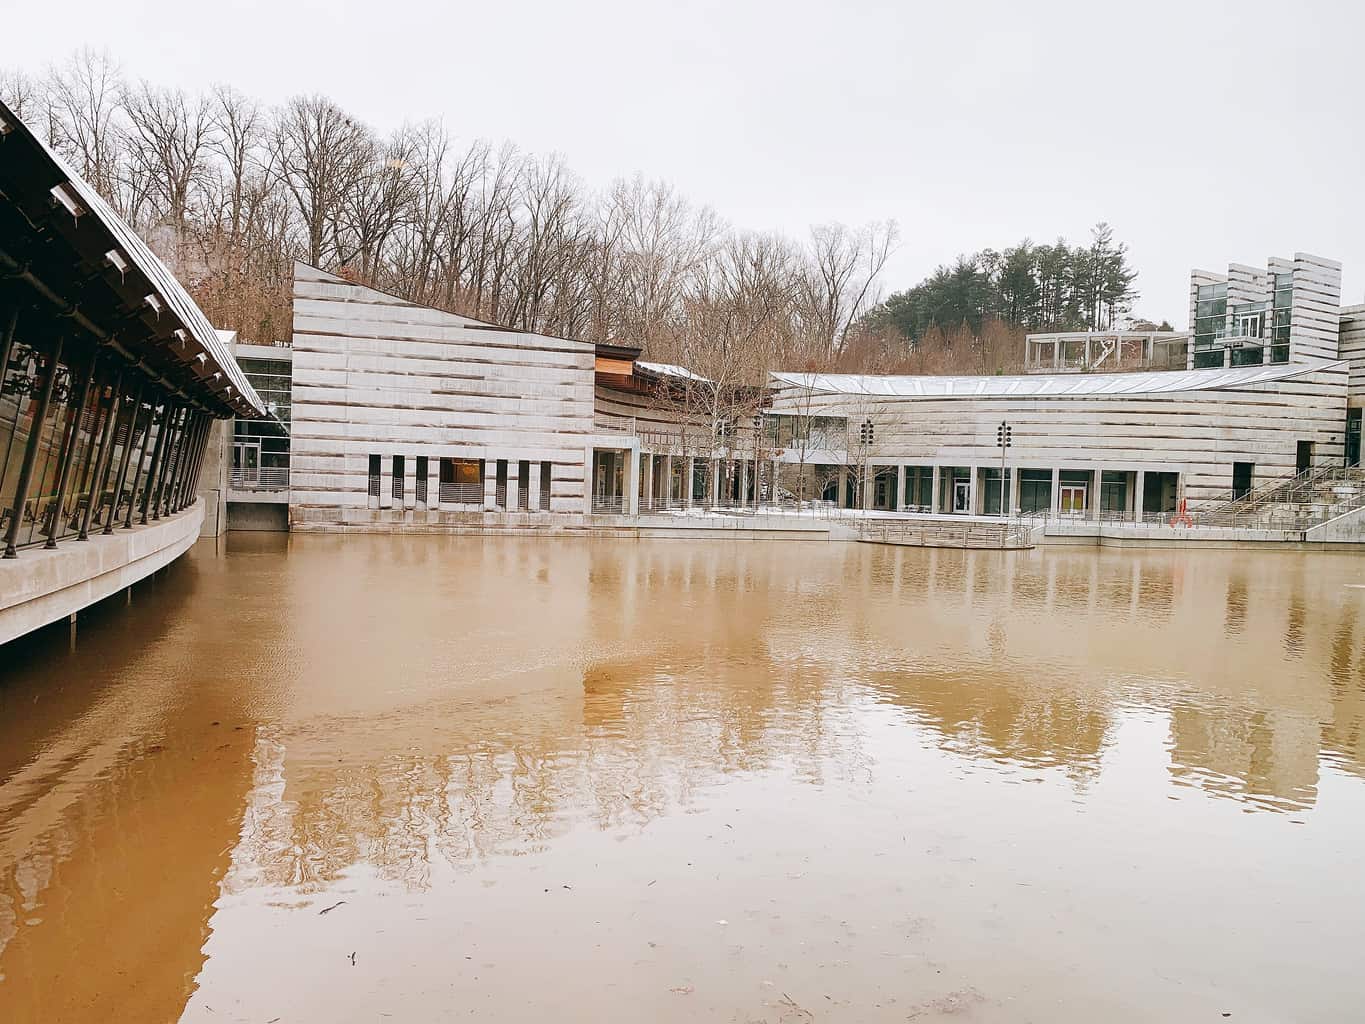 Crystal Bridges Museum of American Art in Arkansas is home to more than 50,000 square feet of gallery space and has a collection worth hundreds of millions of dollars. Best of all, admission is always free!